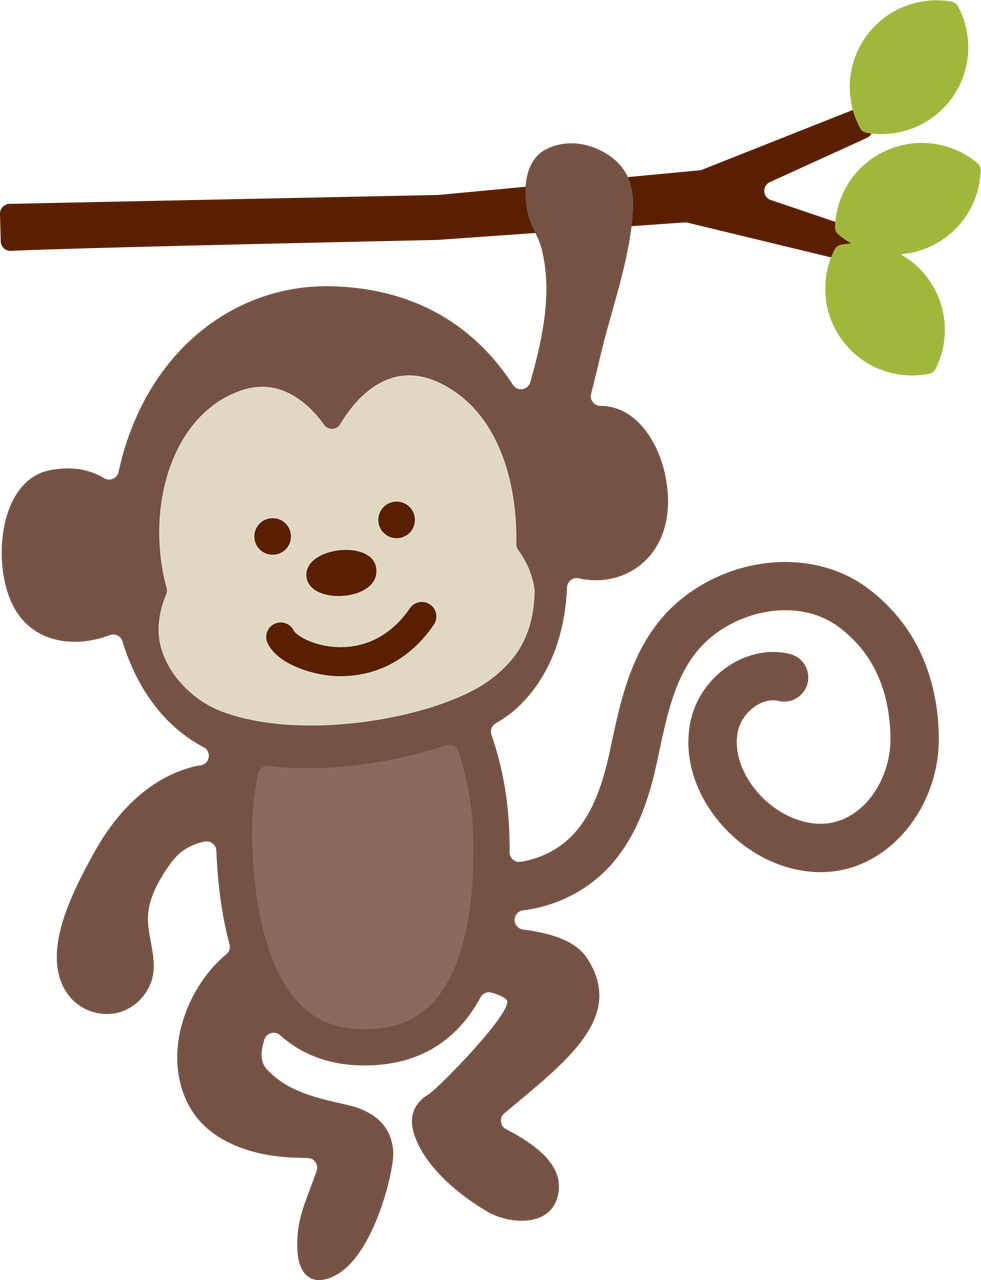 Download Monkey SVG Cut File - Snap Click Supply Co.